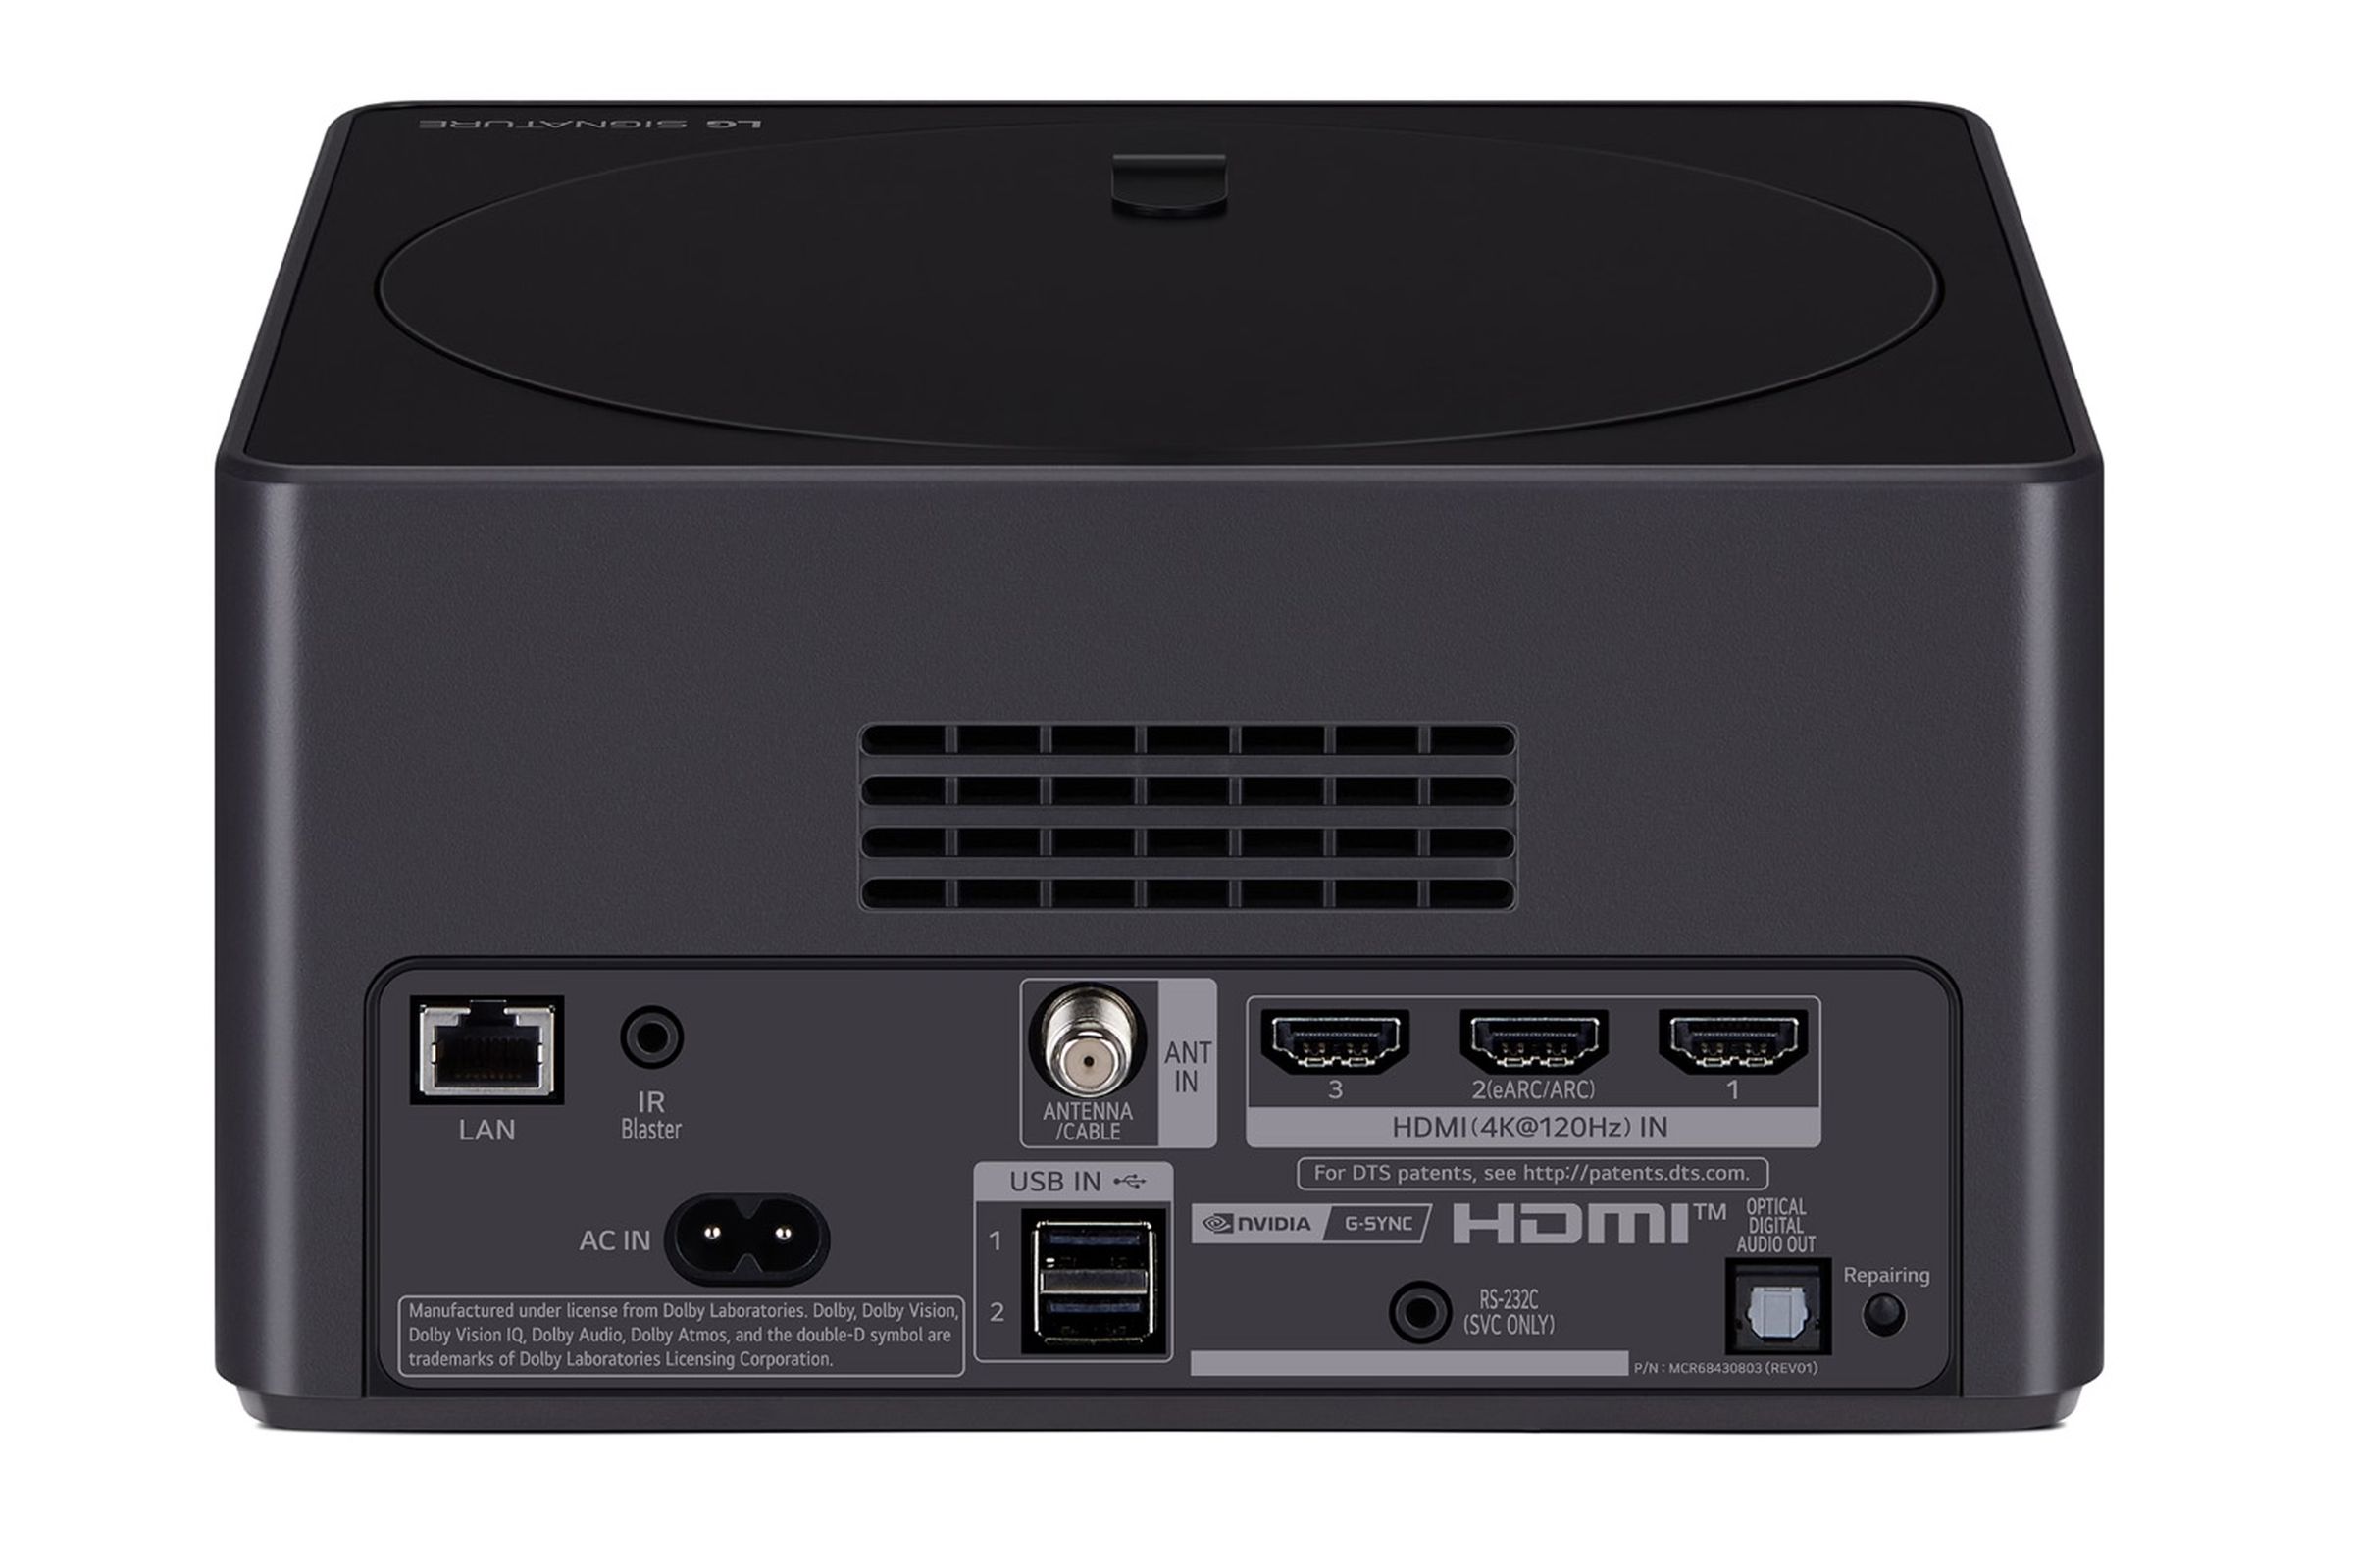 The back of LG’s Zero Connect Box, showing three HDMI ports, USB, Ethernet, and Optical audio.